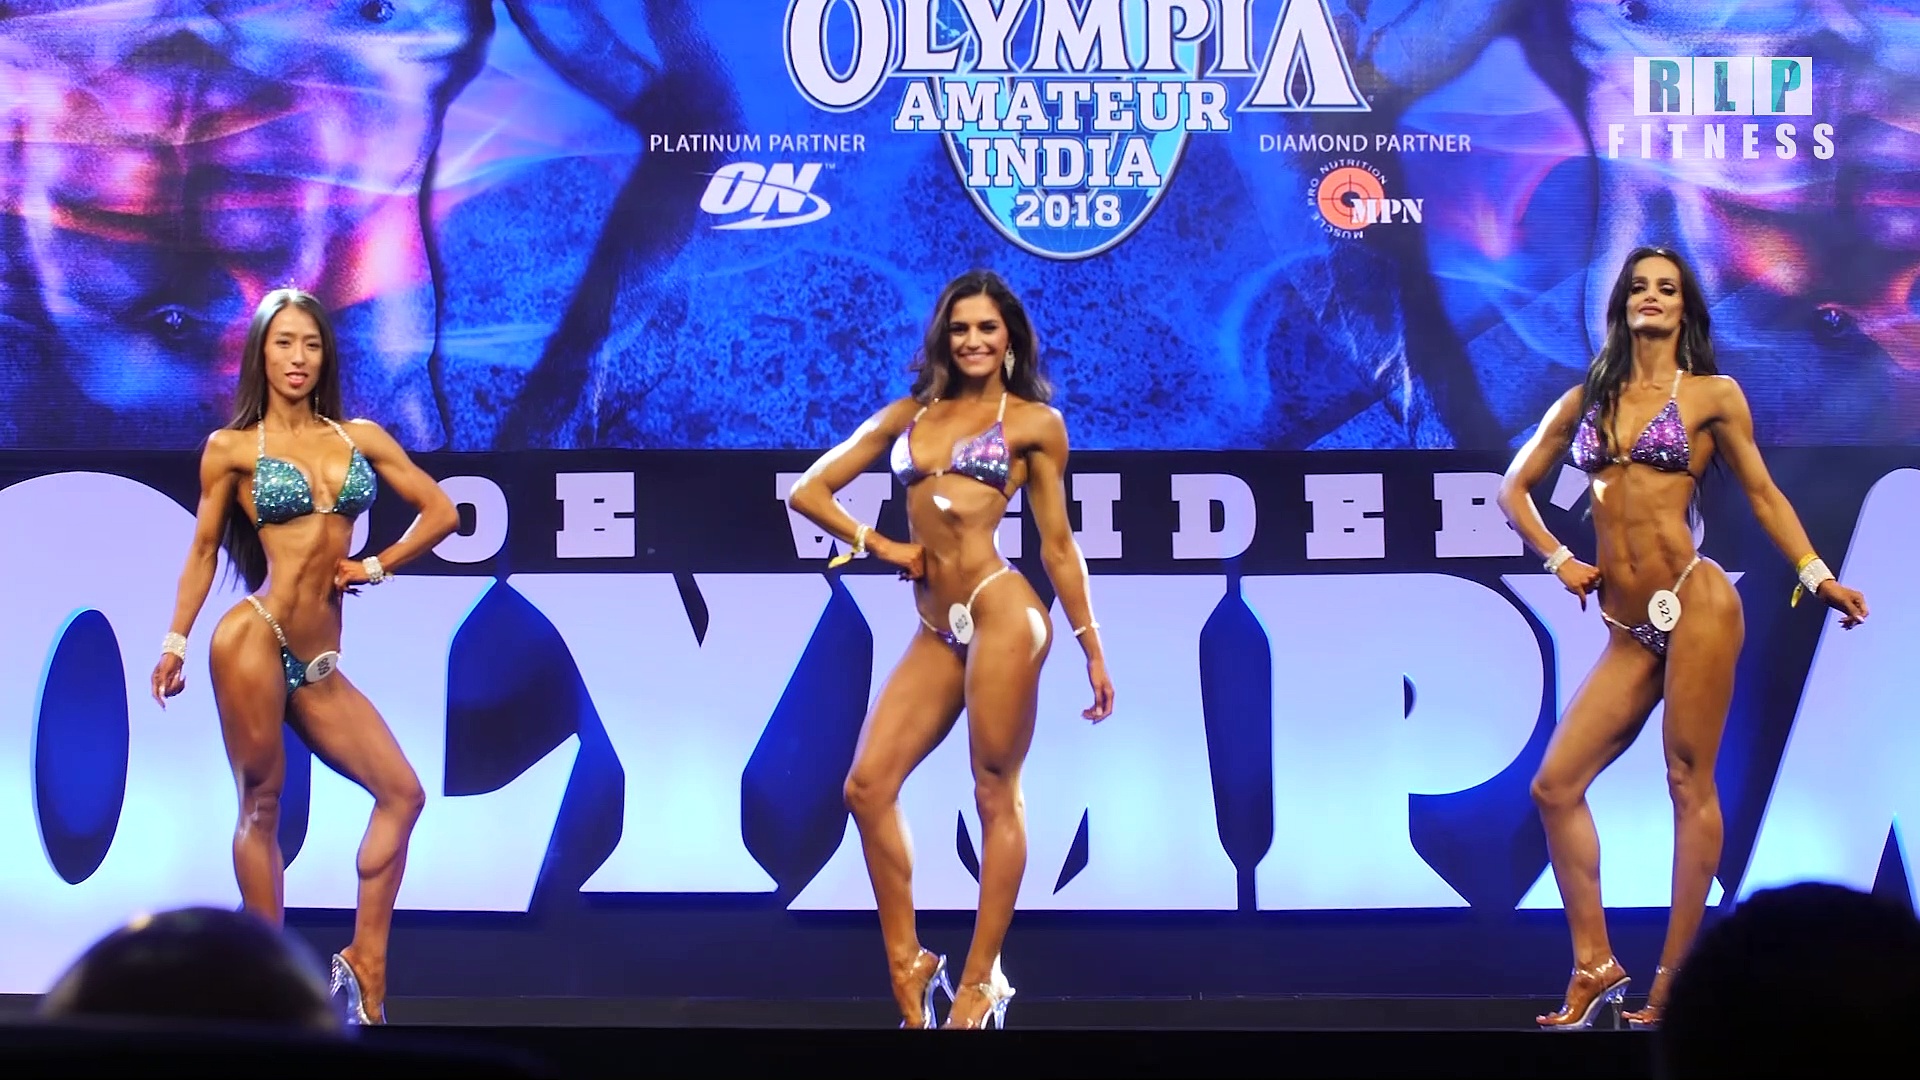 Olly Esse Interview | At Bodypower Expo 2019 India | Olly Esse DJ Girl. http://bit.ly/2T8gYQd